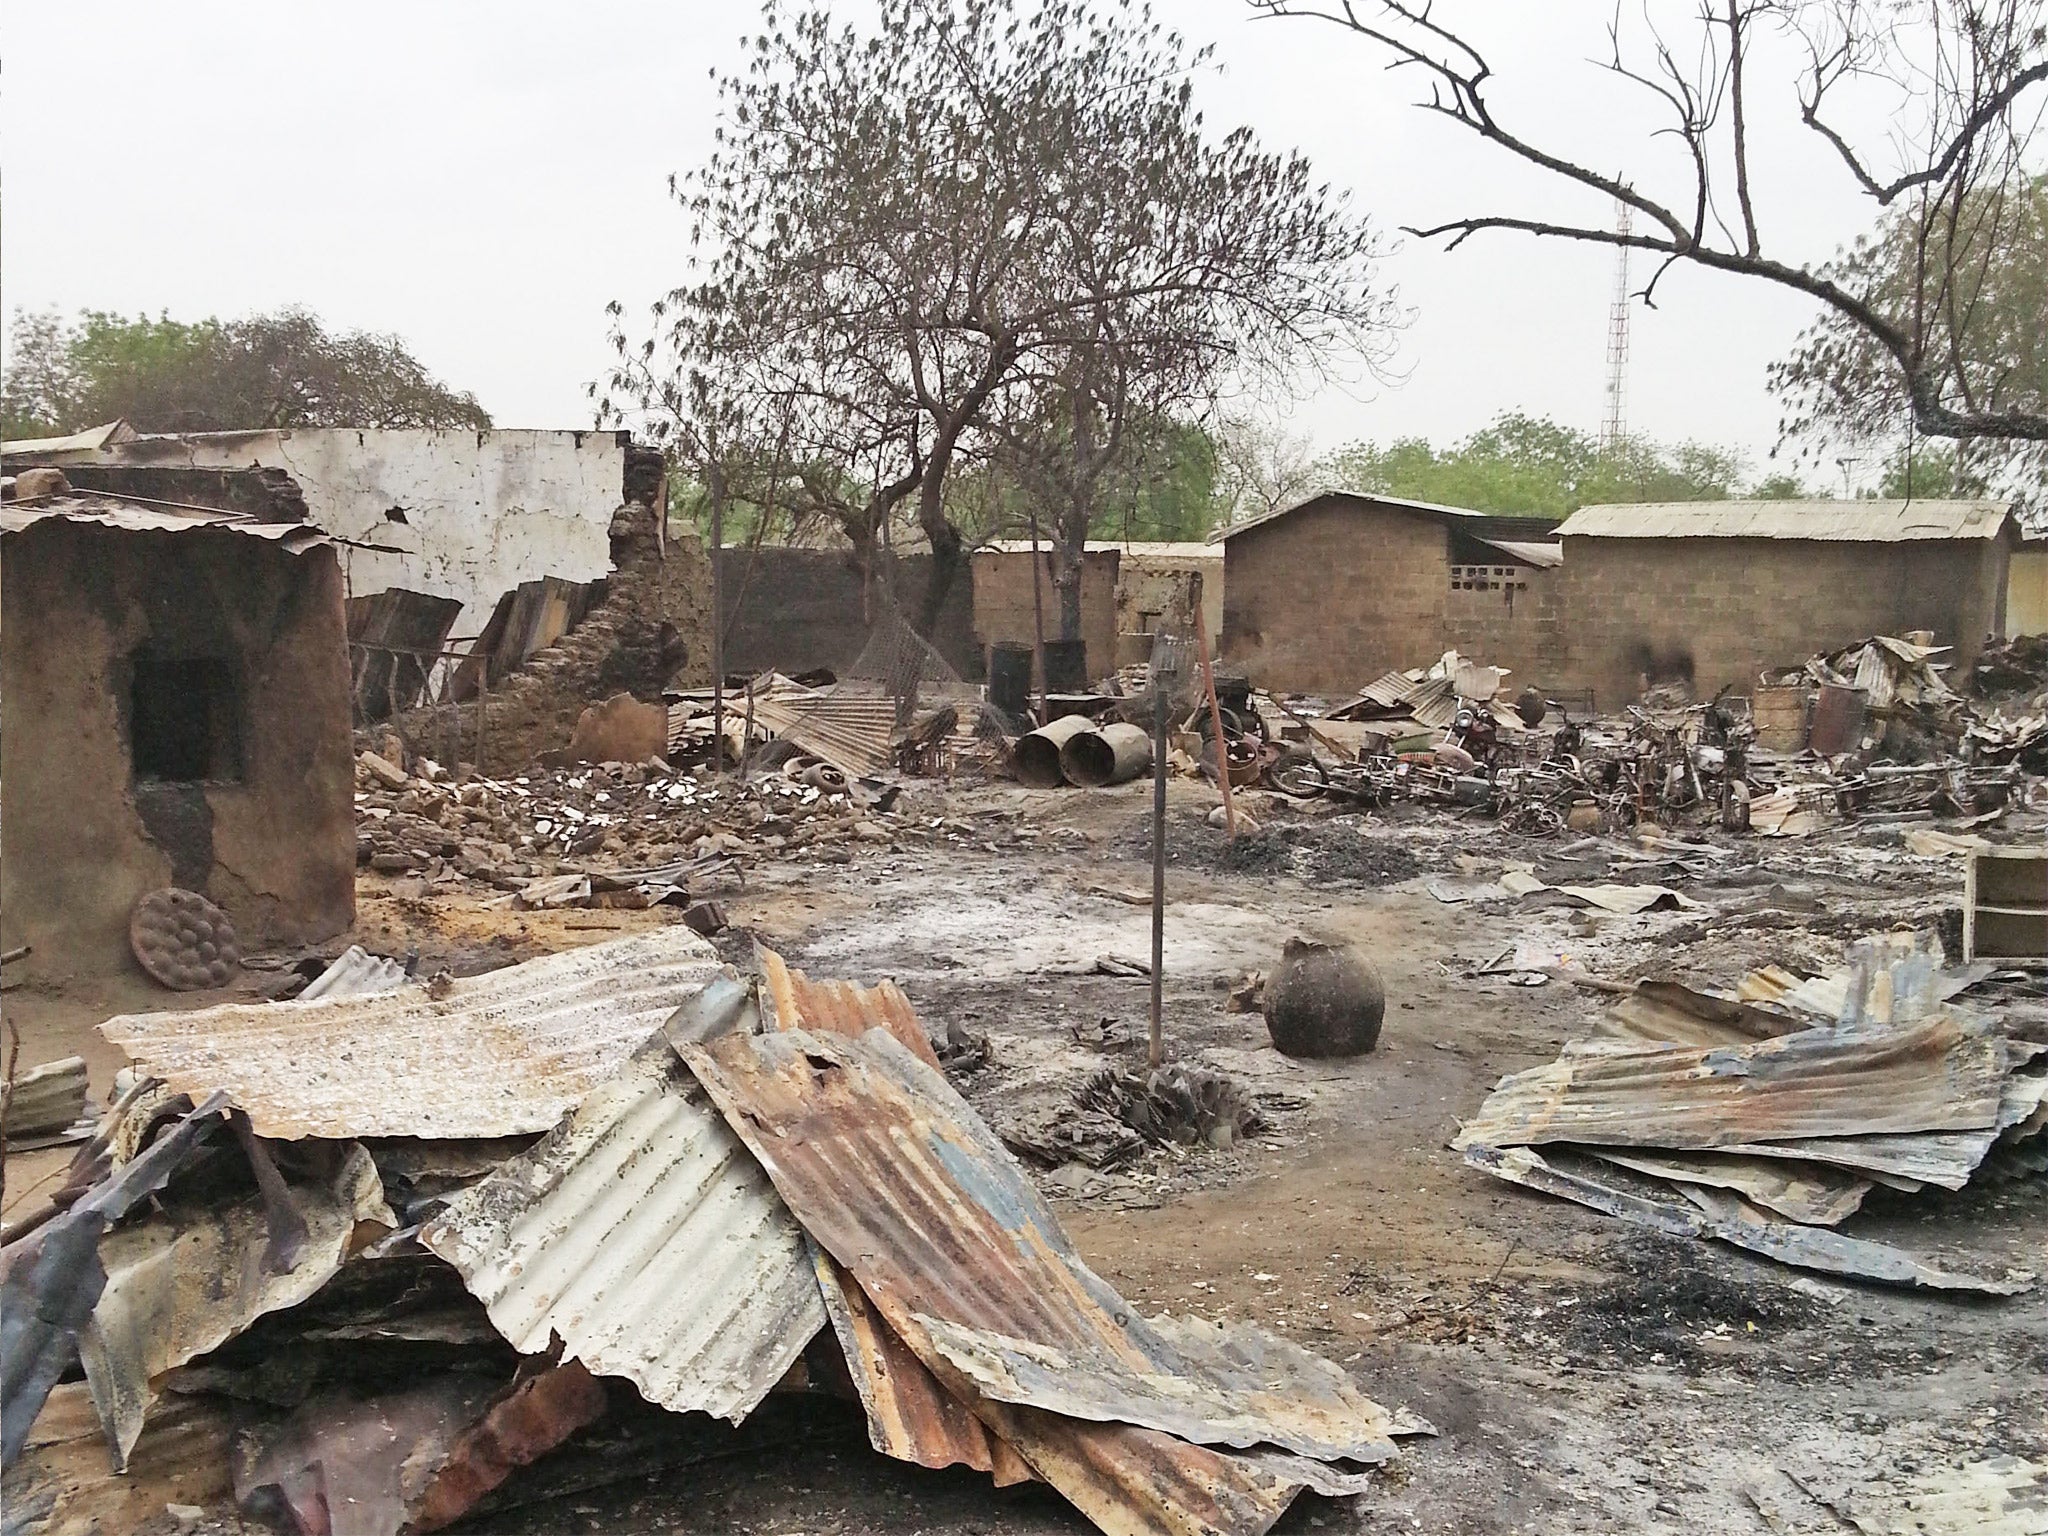 Ruins of burnt out houses in the north-eastern settlement of Baga, pictured after Boko Haram attacks in 2013